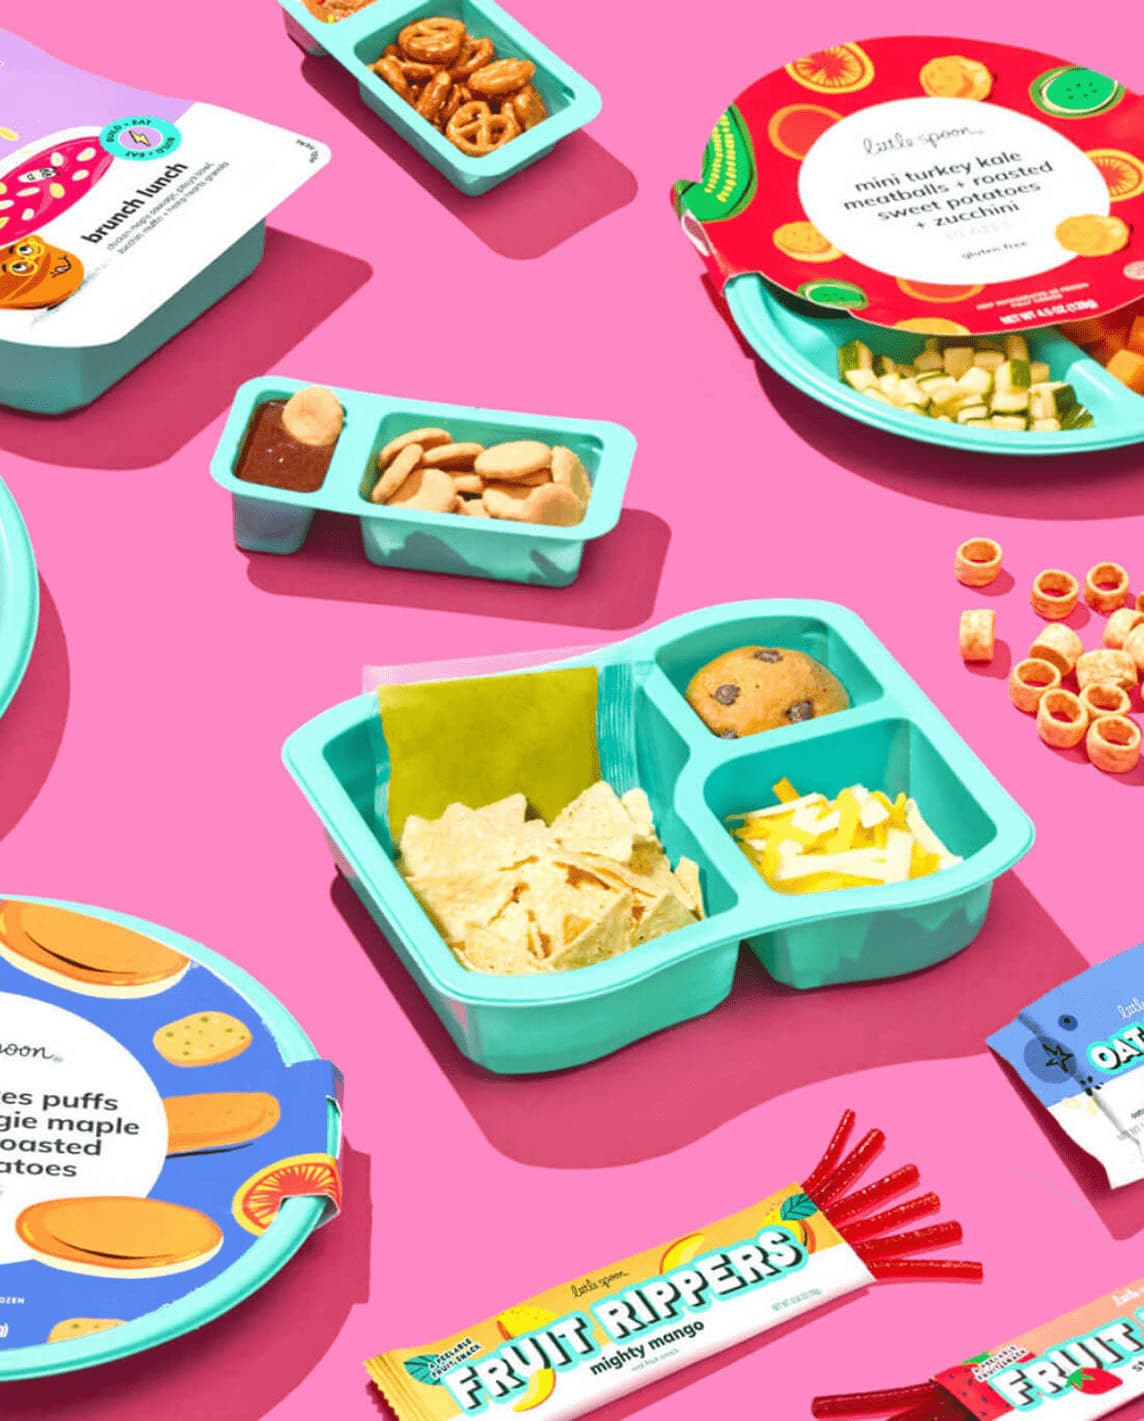 An overlay of Plates, Fruit Rippers, Dipsters and Lunchers are displayed opened over a hot pink background.